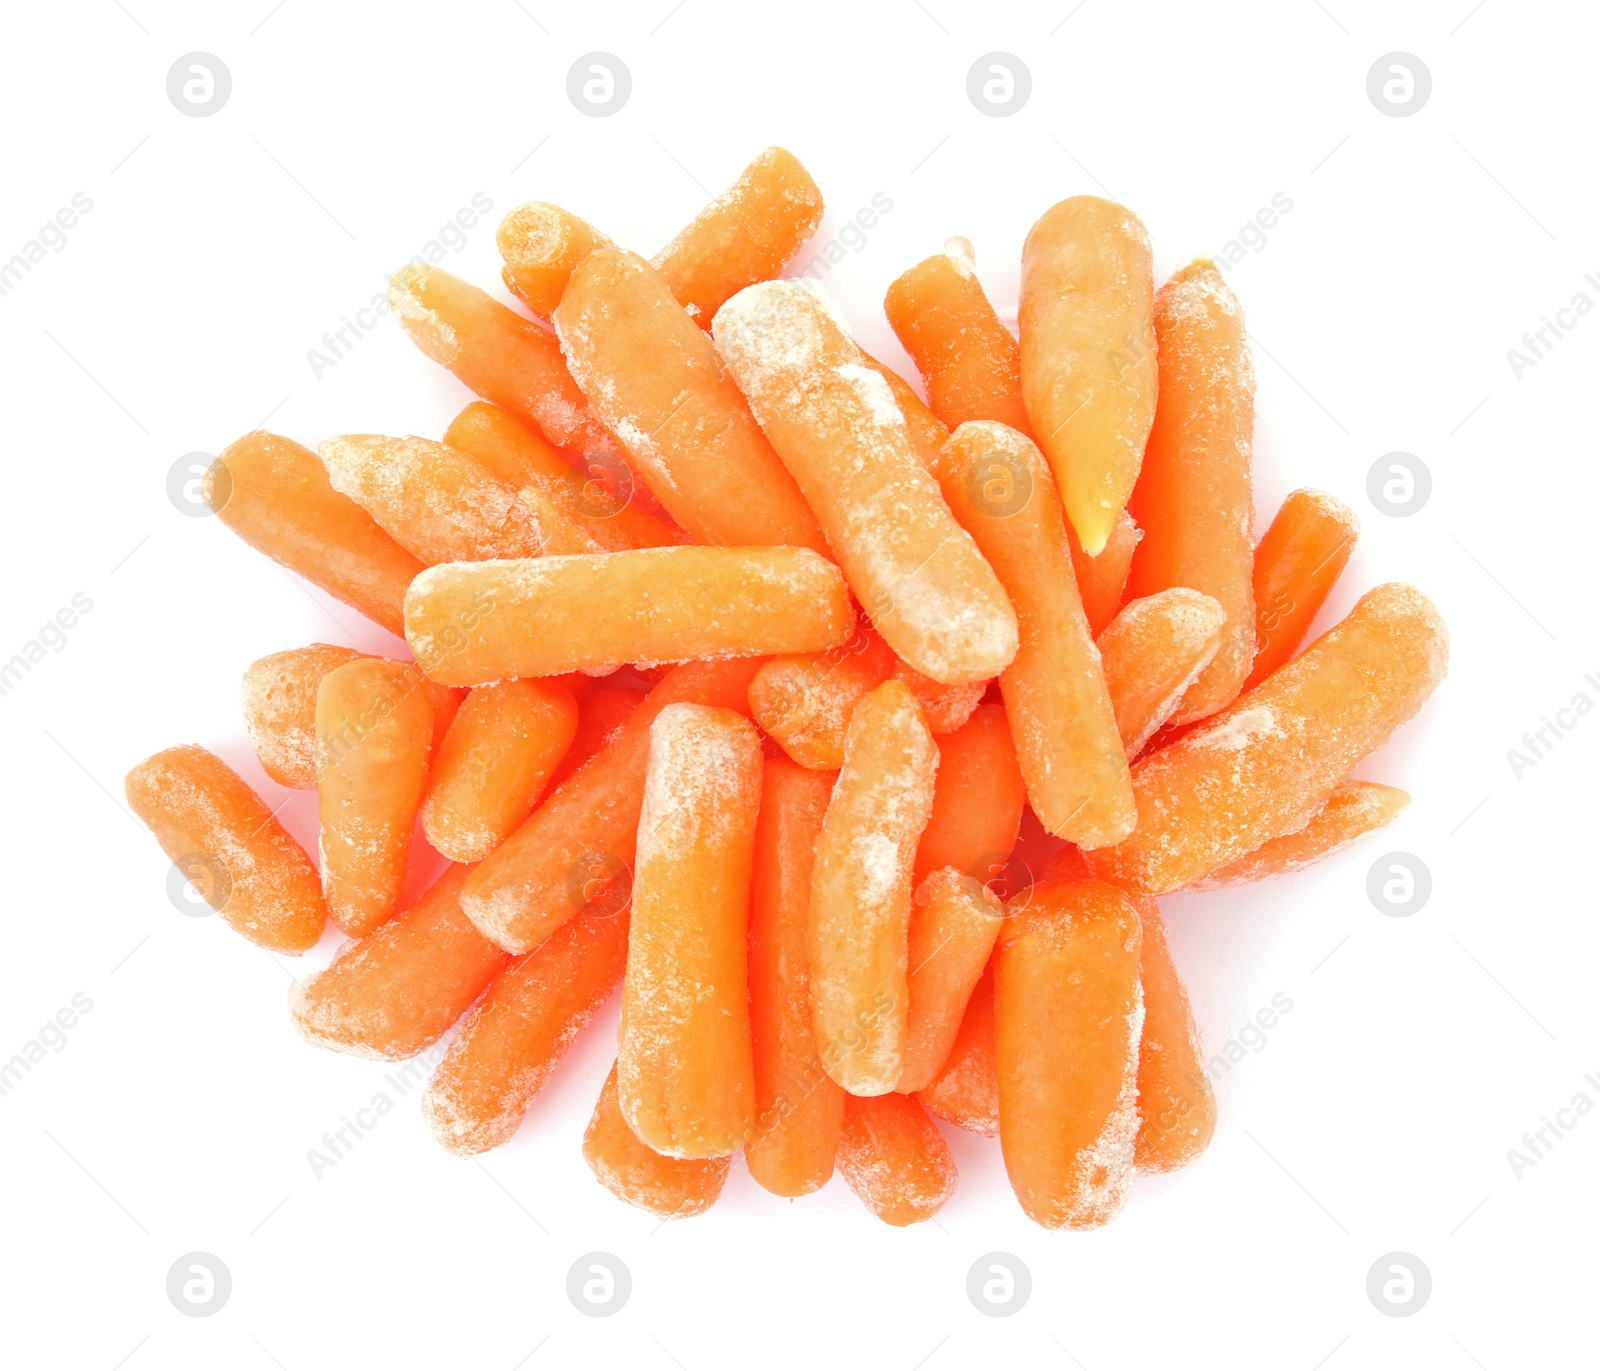 Photo of Frozen carrots on white background. Vegetable preservation